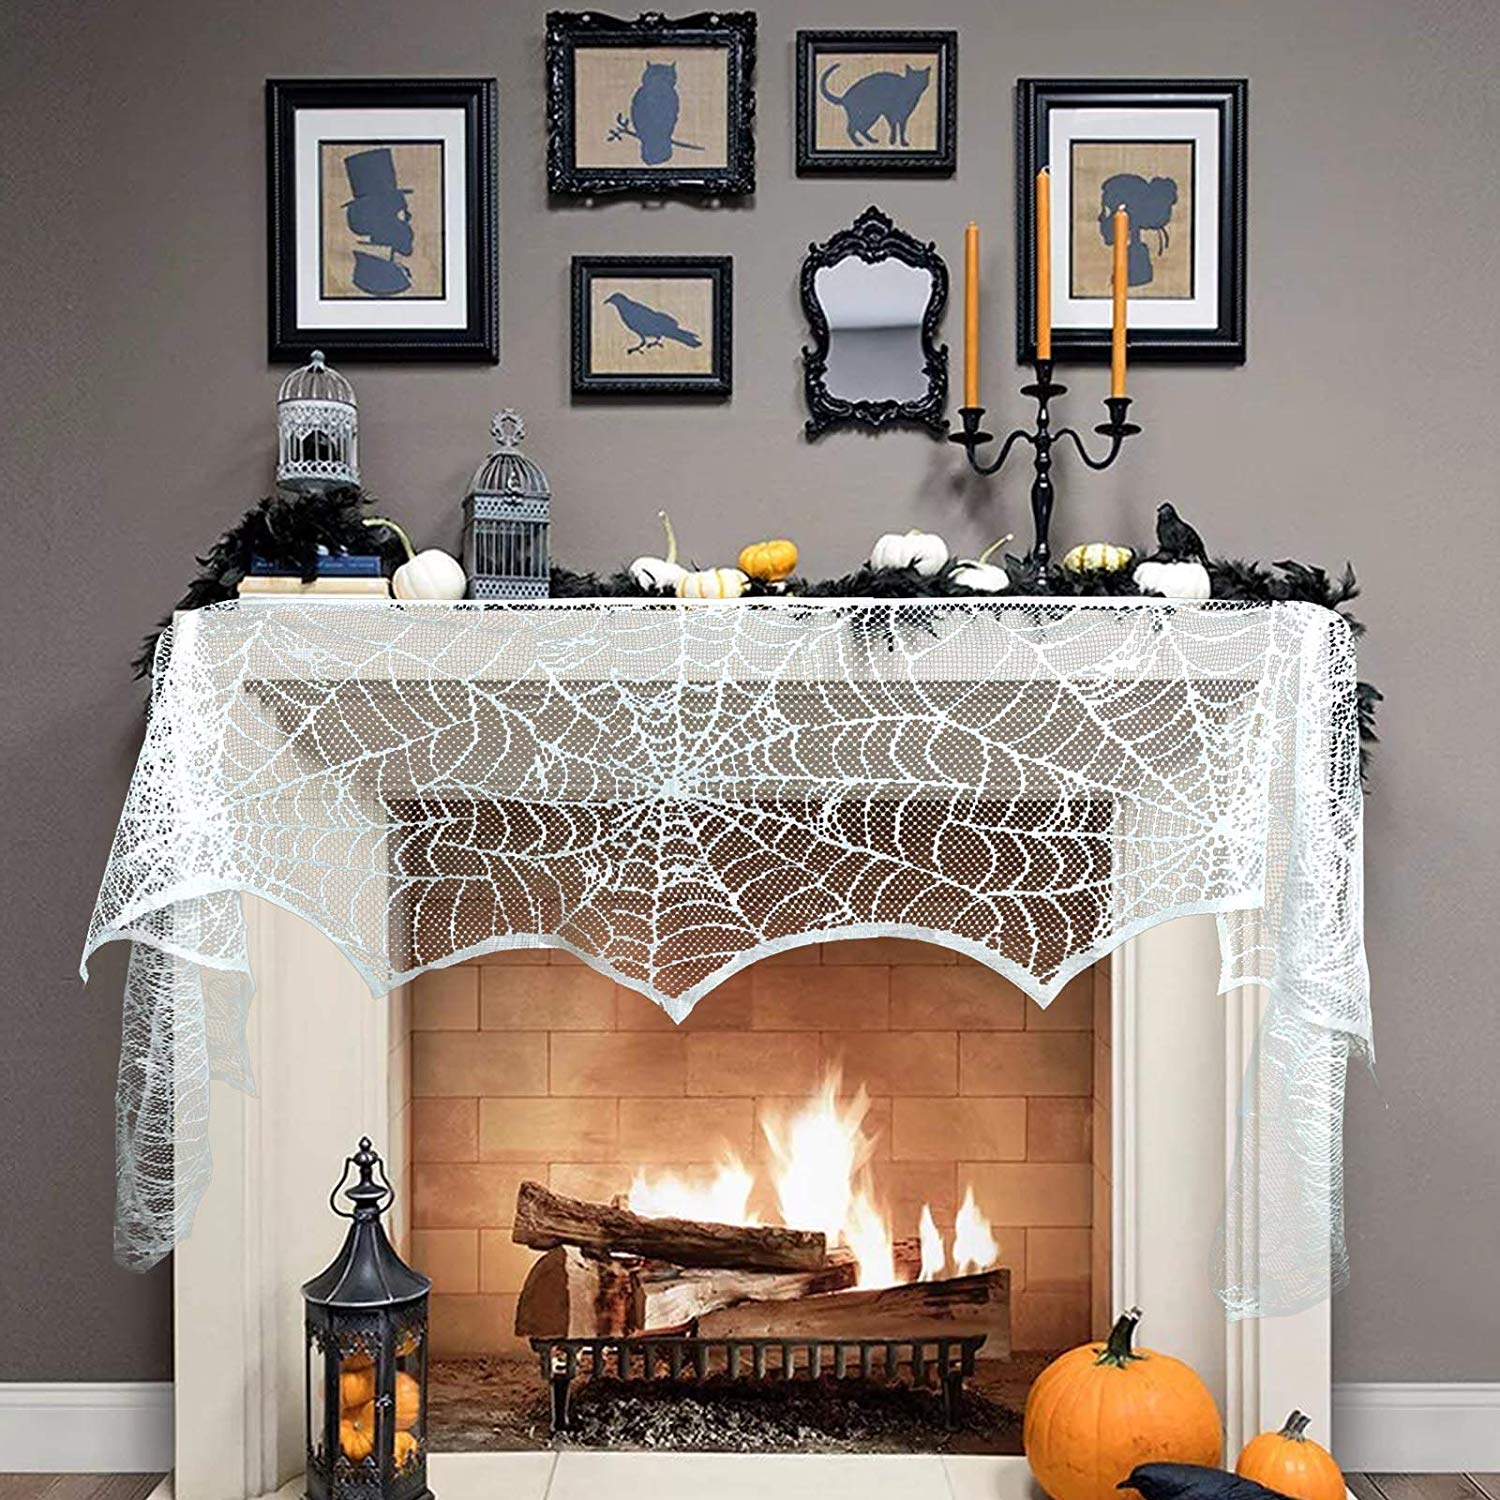 Living Room with Fireplace Decorating Ideas Best Of Vlovelife 18 X 96 Halloween Decorations Spiderweb Mantel Scarf Polyester Cobweb Fireplace Mantel Scarf for Halloween Party Festival Scary Movie